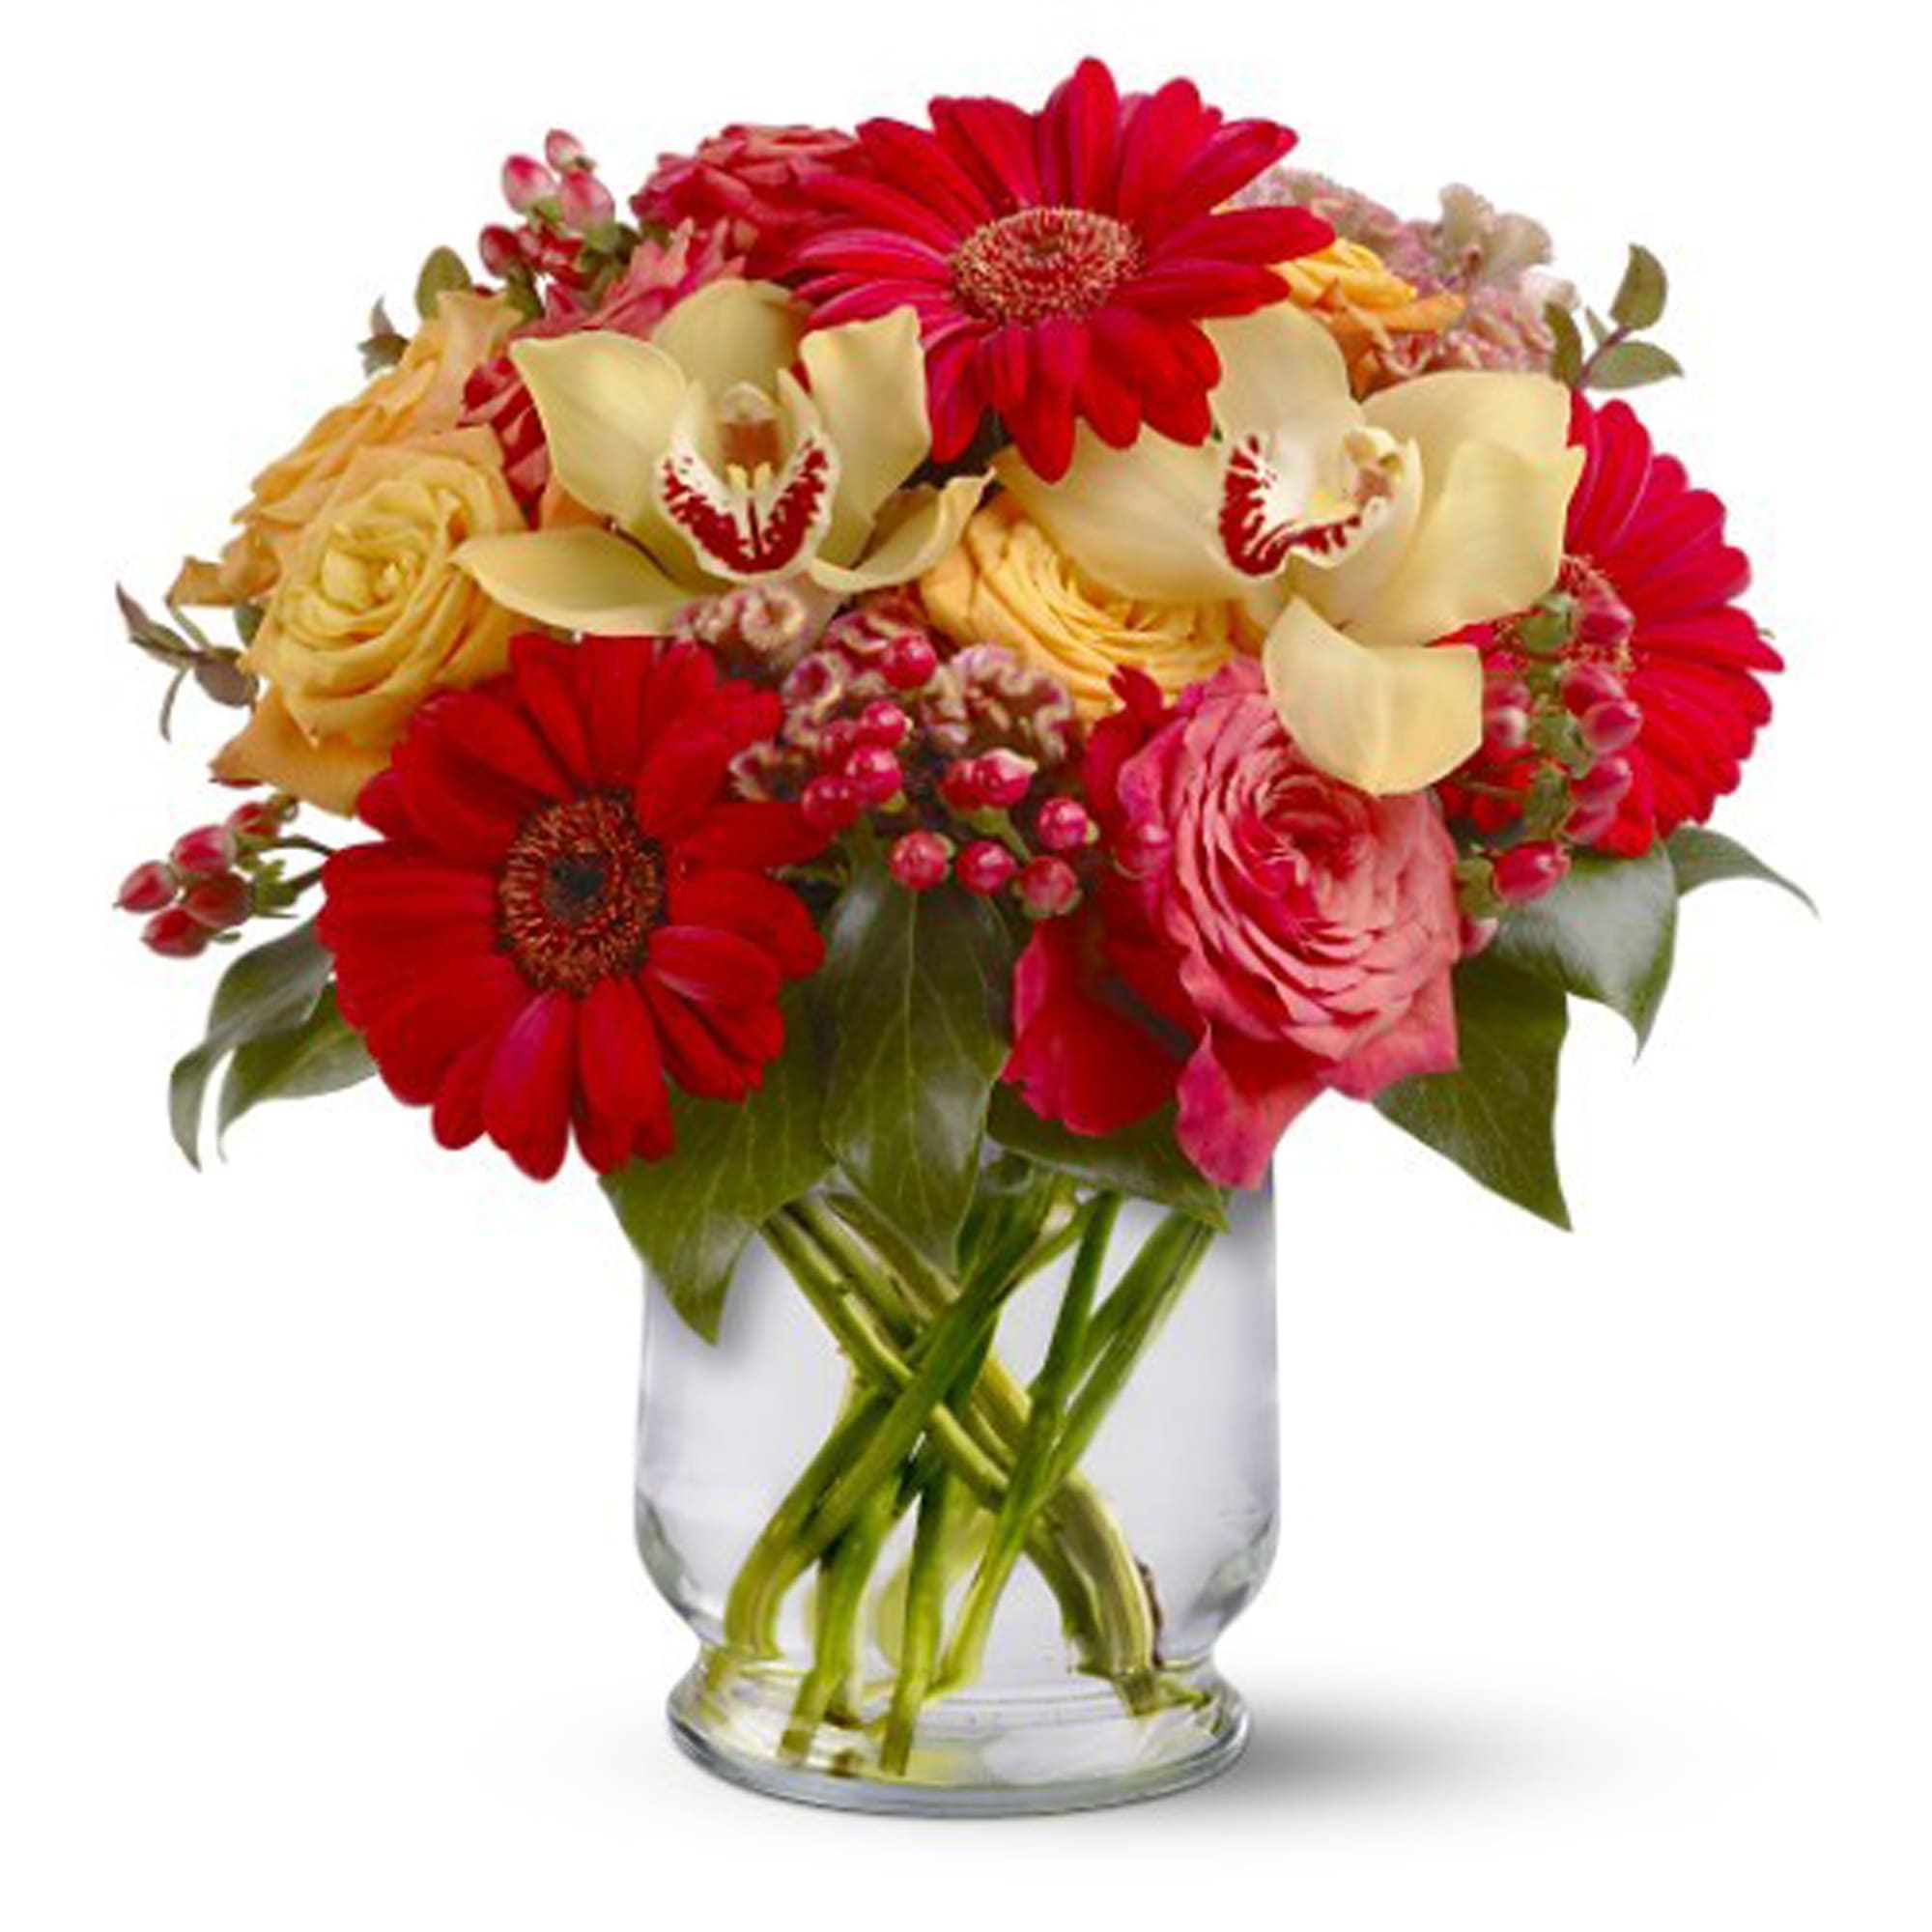 Orchid Orchard - When you dream of luxury, do you think of lush, fragrant roses mixed with exotic, buttery yellow orchids? This artistic bouquet of two of nature's most royal flowers - simply arranged with ruby-red gerberas and hypericum berries in a clear vase - is a classic floral gift for any occasion.  Orange and yellow roses, yellow Cymbidium orchids, red miniature gerberas, hypericum, huckleberry and salal and bronze coxcomb are delivered in a clear glass hurricane vase.  Approximately 9&quot; (W) x 12&quot; (H)  Orientation: All-Around  As Shown : TFWEB241